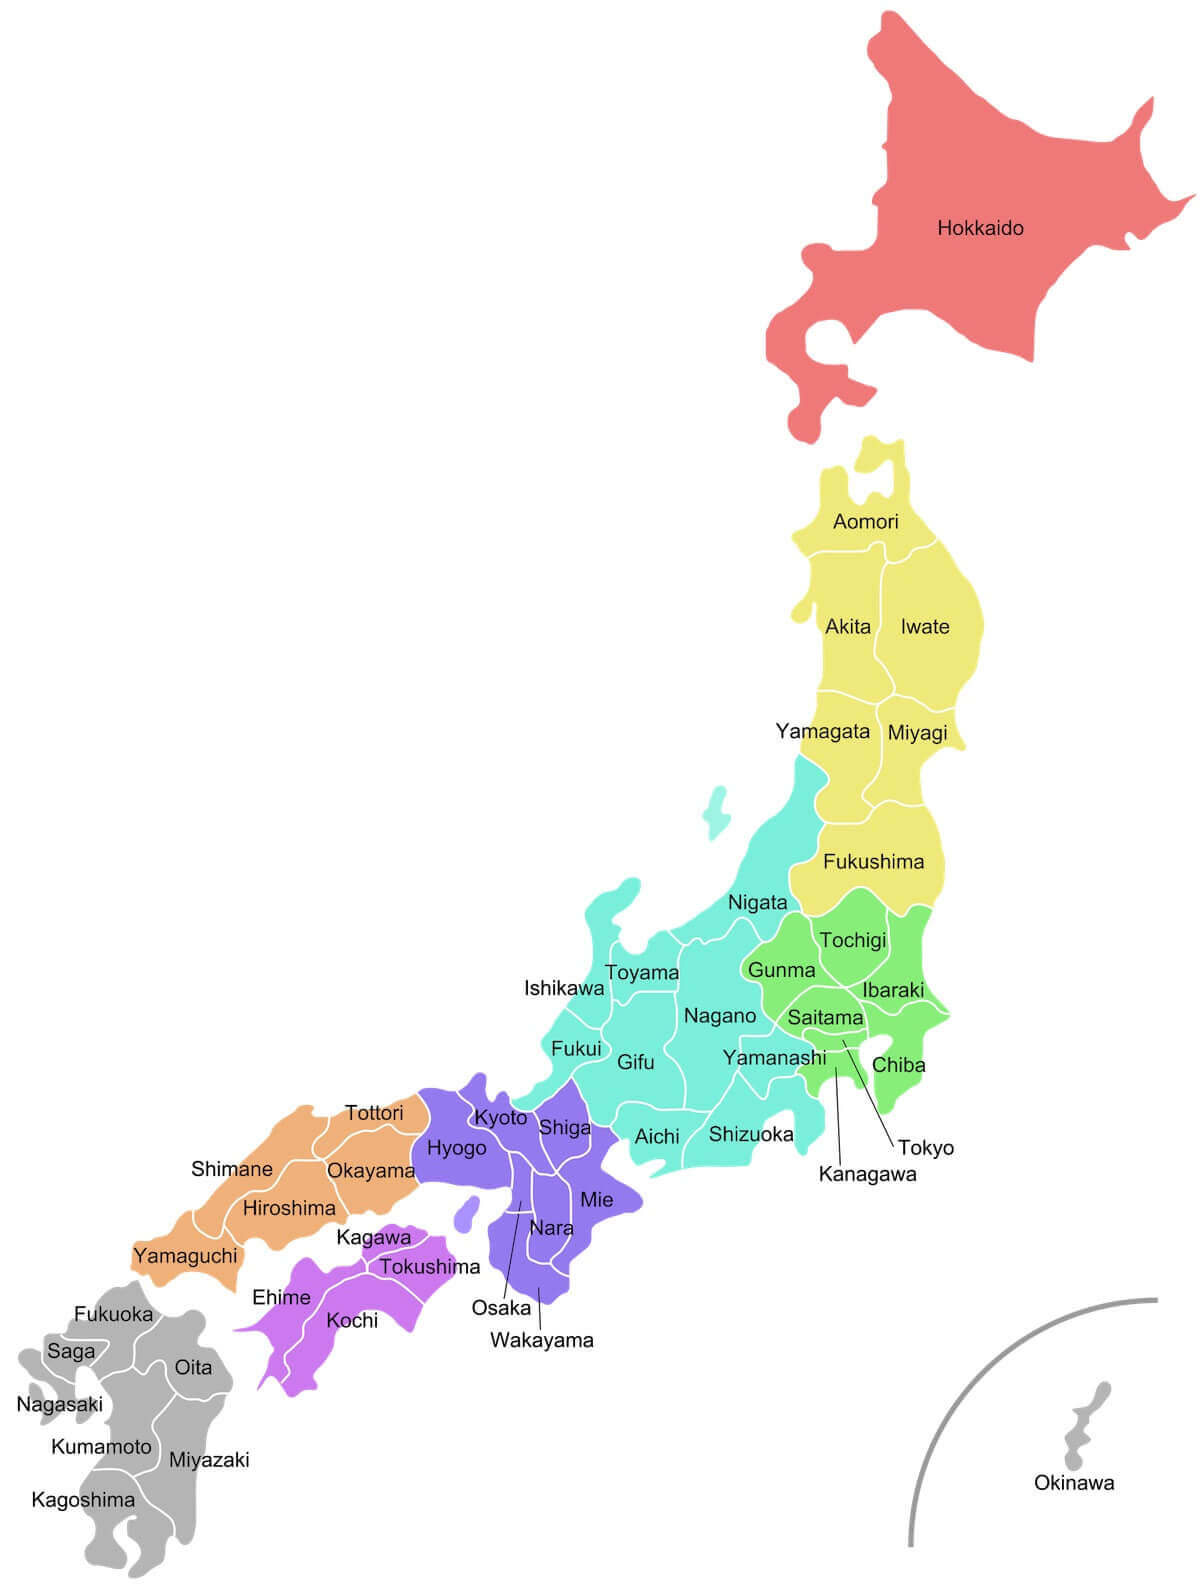 The region colored in yellow shows all of the prefectures that make up the Tohoku region.